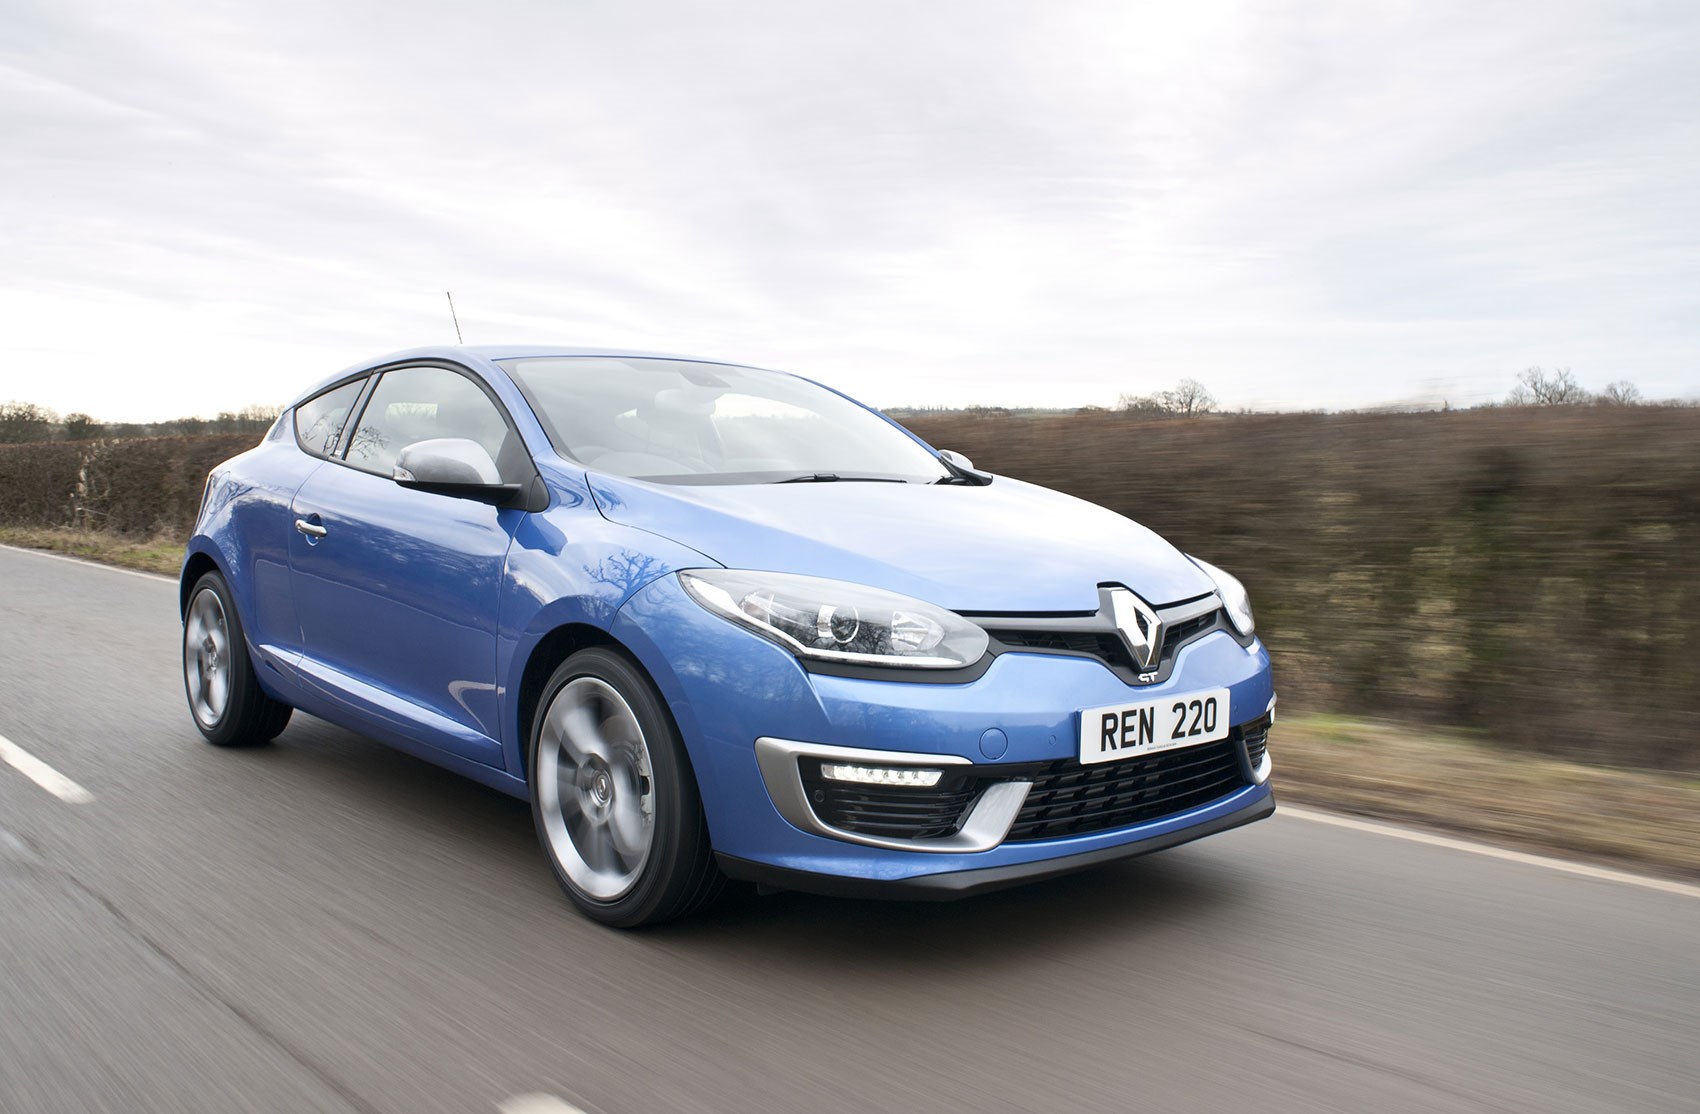 Verlichting lila cafetaria Renault Megane Renaultsport GT 220 Coupe (2015) review | CAR Magazine